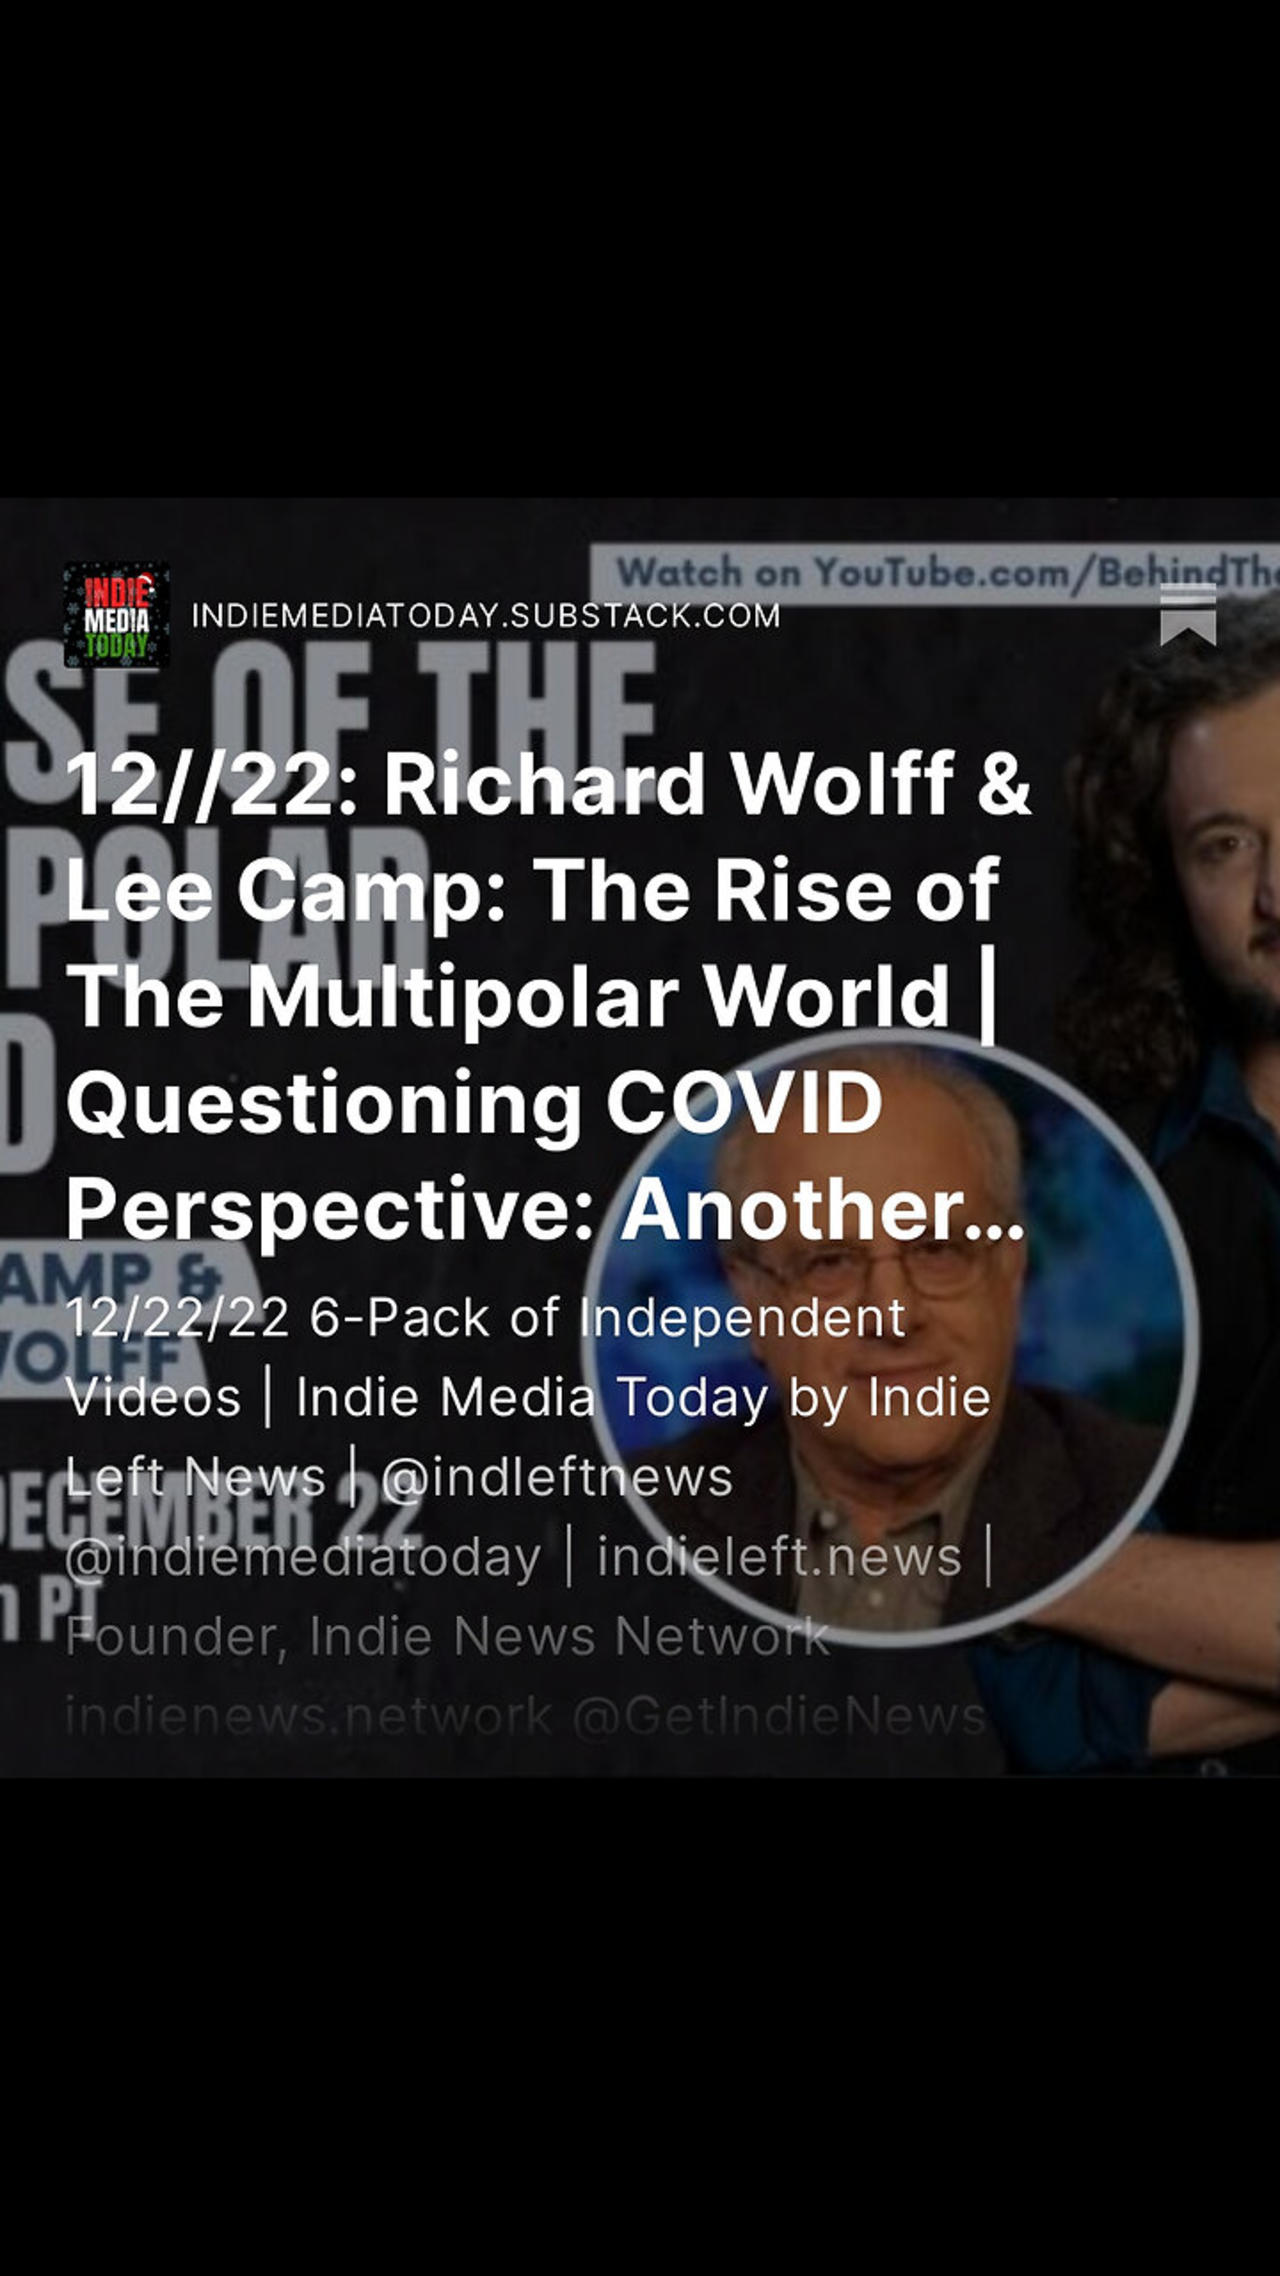 12/22: Richard Wolff & Lee Camp: The Rise of The Multipolar World | #TwitterFiles: a Different View